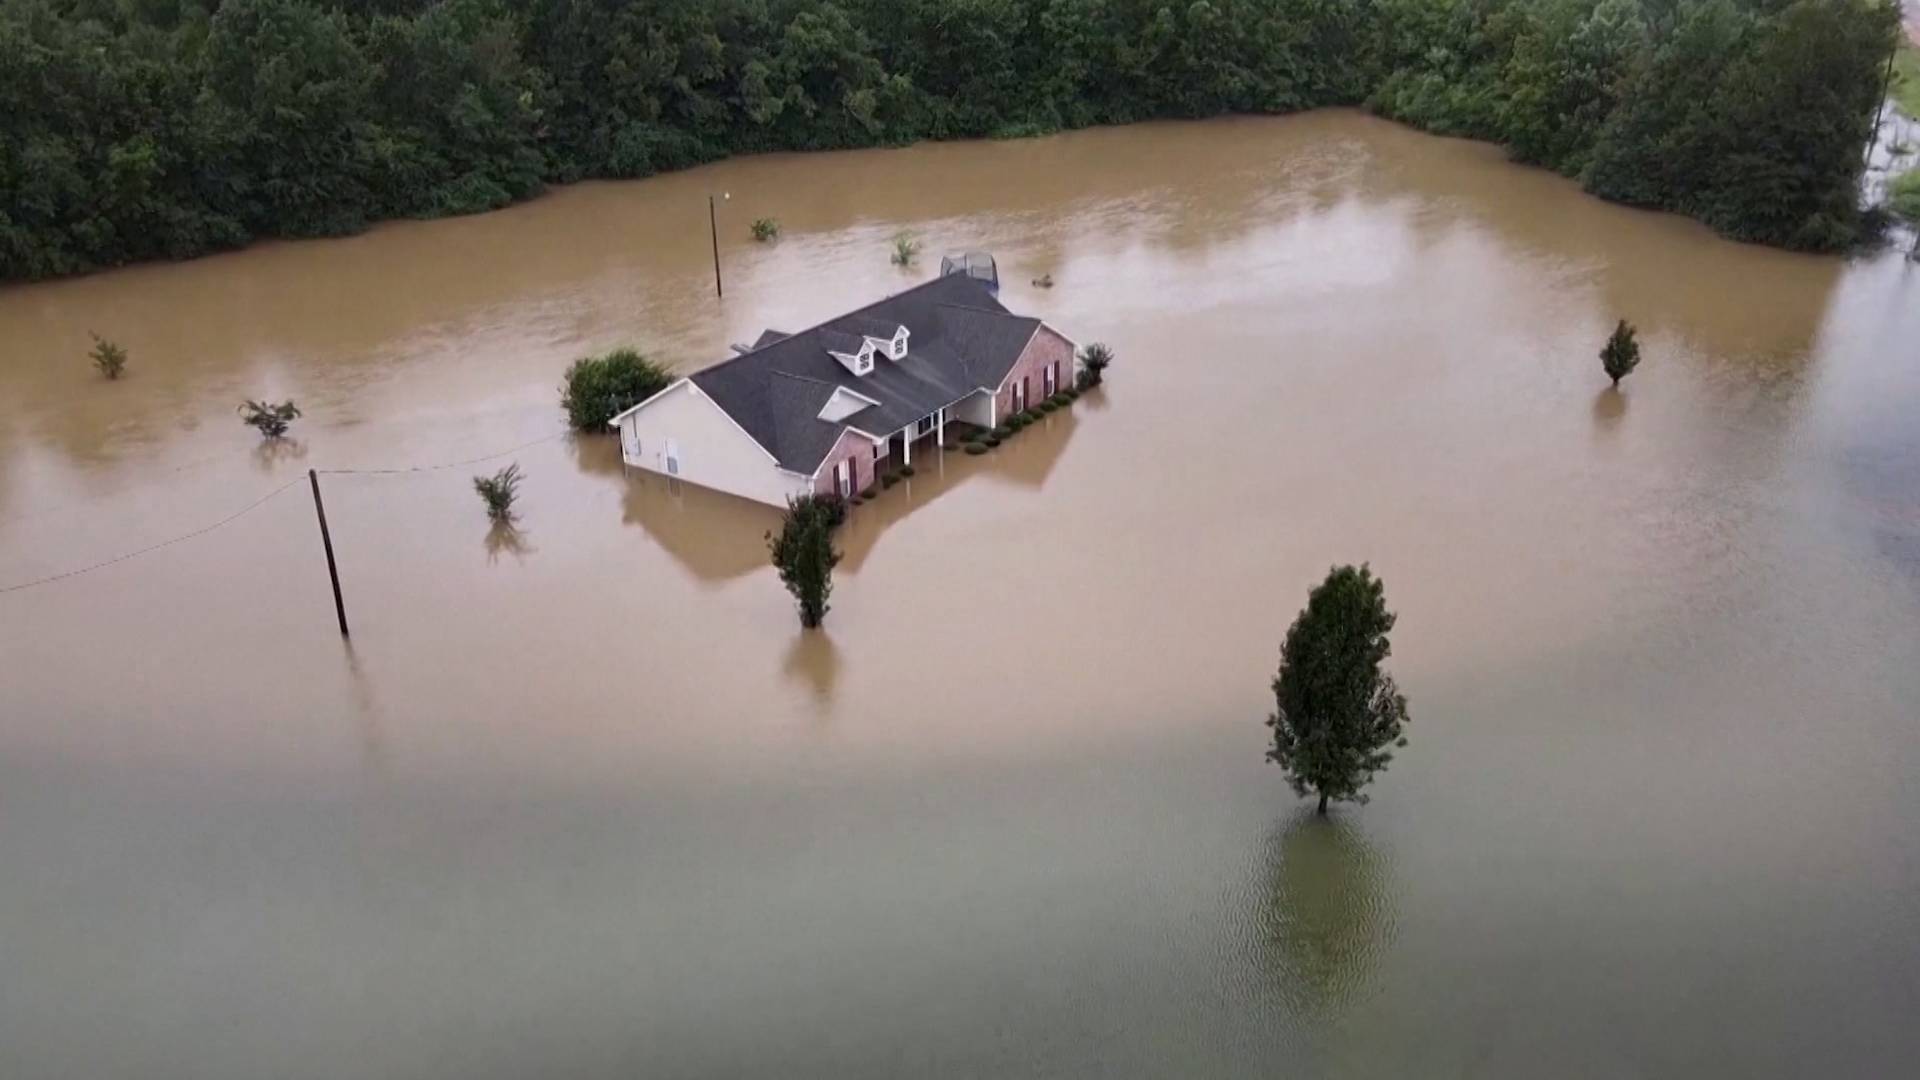 Mayor of Jackson, Mississippi, Warns Residents to “Get Out Now” as Floodwaters Rise